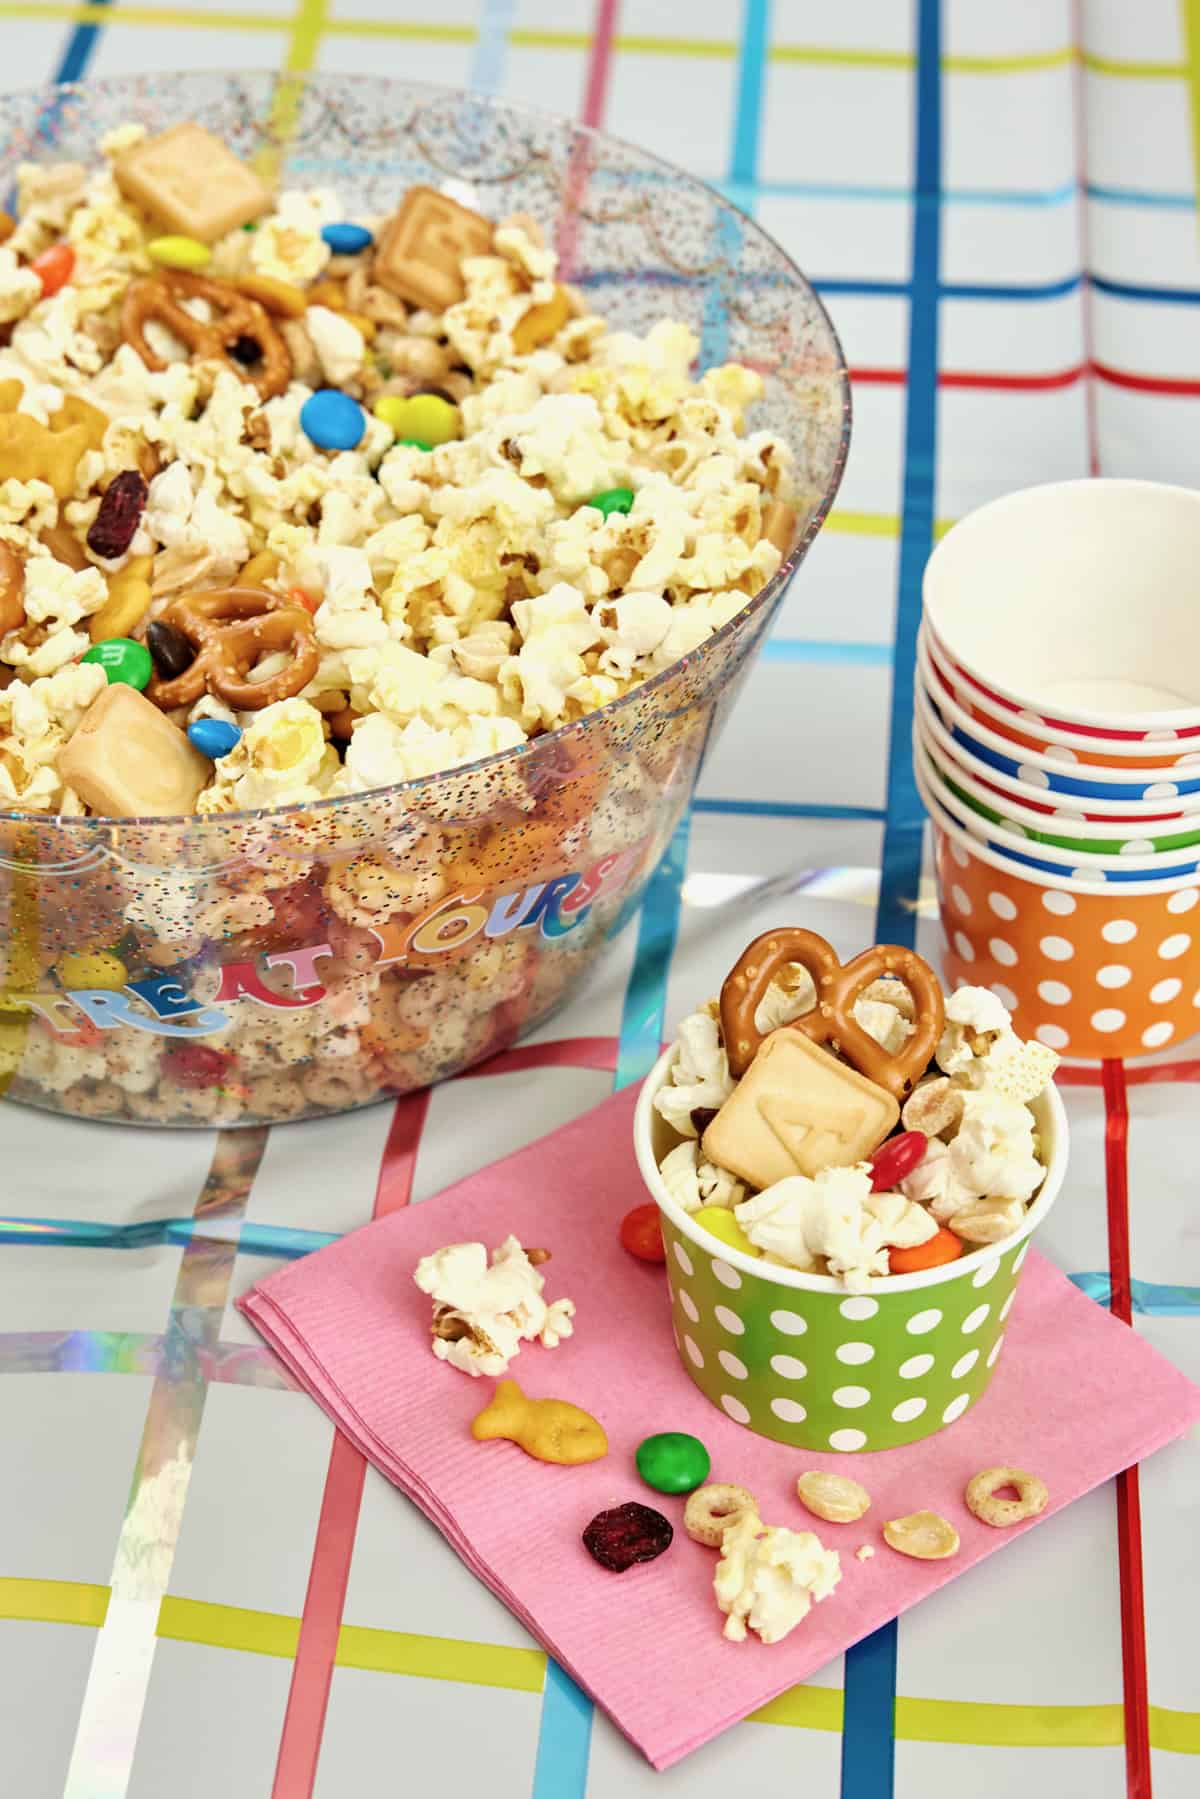 A stack of paper cups next to a large glass bowl reading TREAT YOURSELF filled with a popcorn snack mix with pretzels, M&Ms, dried cranberries, roasted peanuts and alphabet cookies.